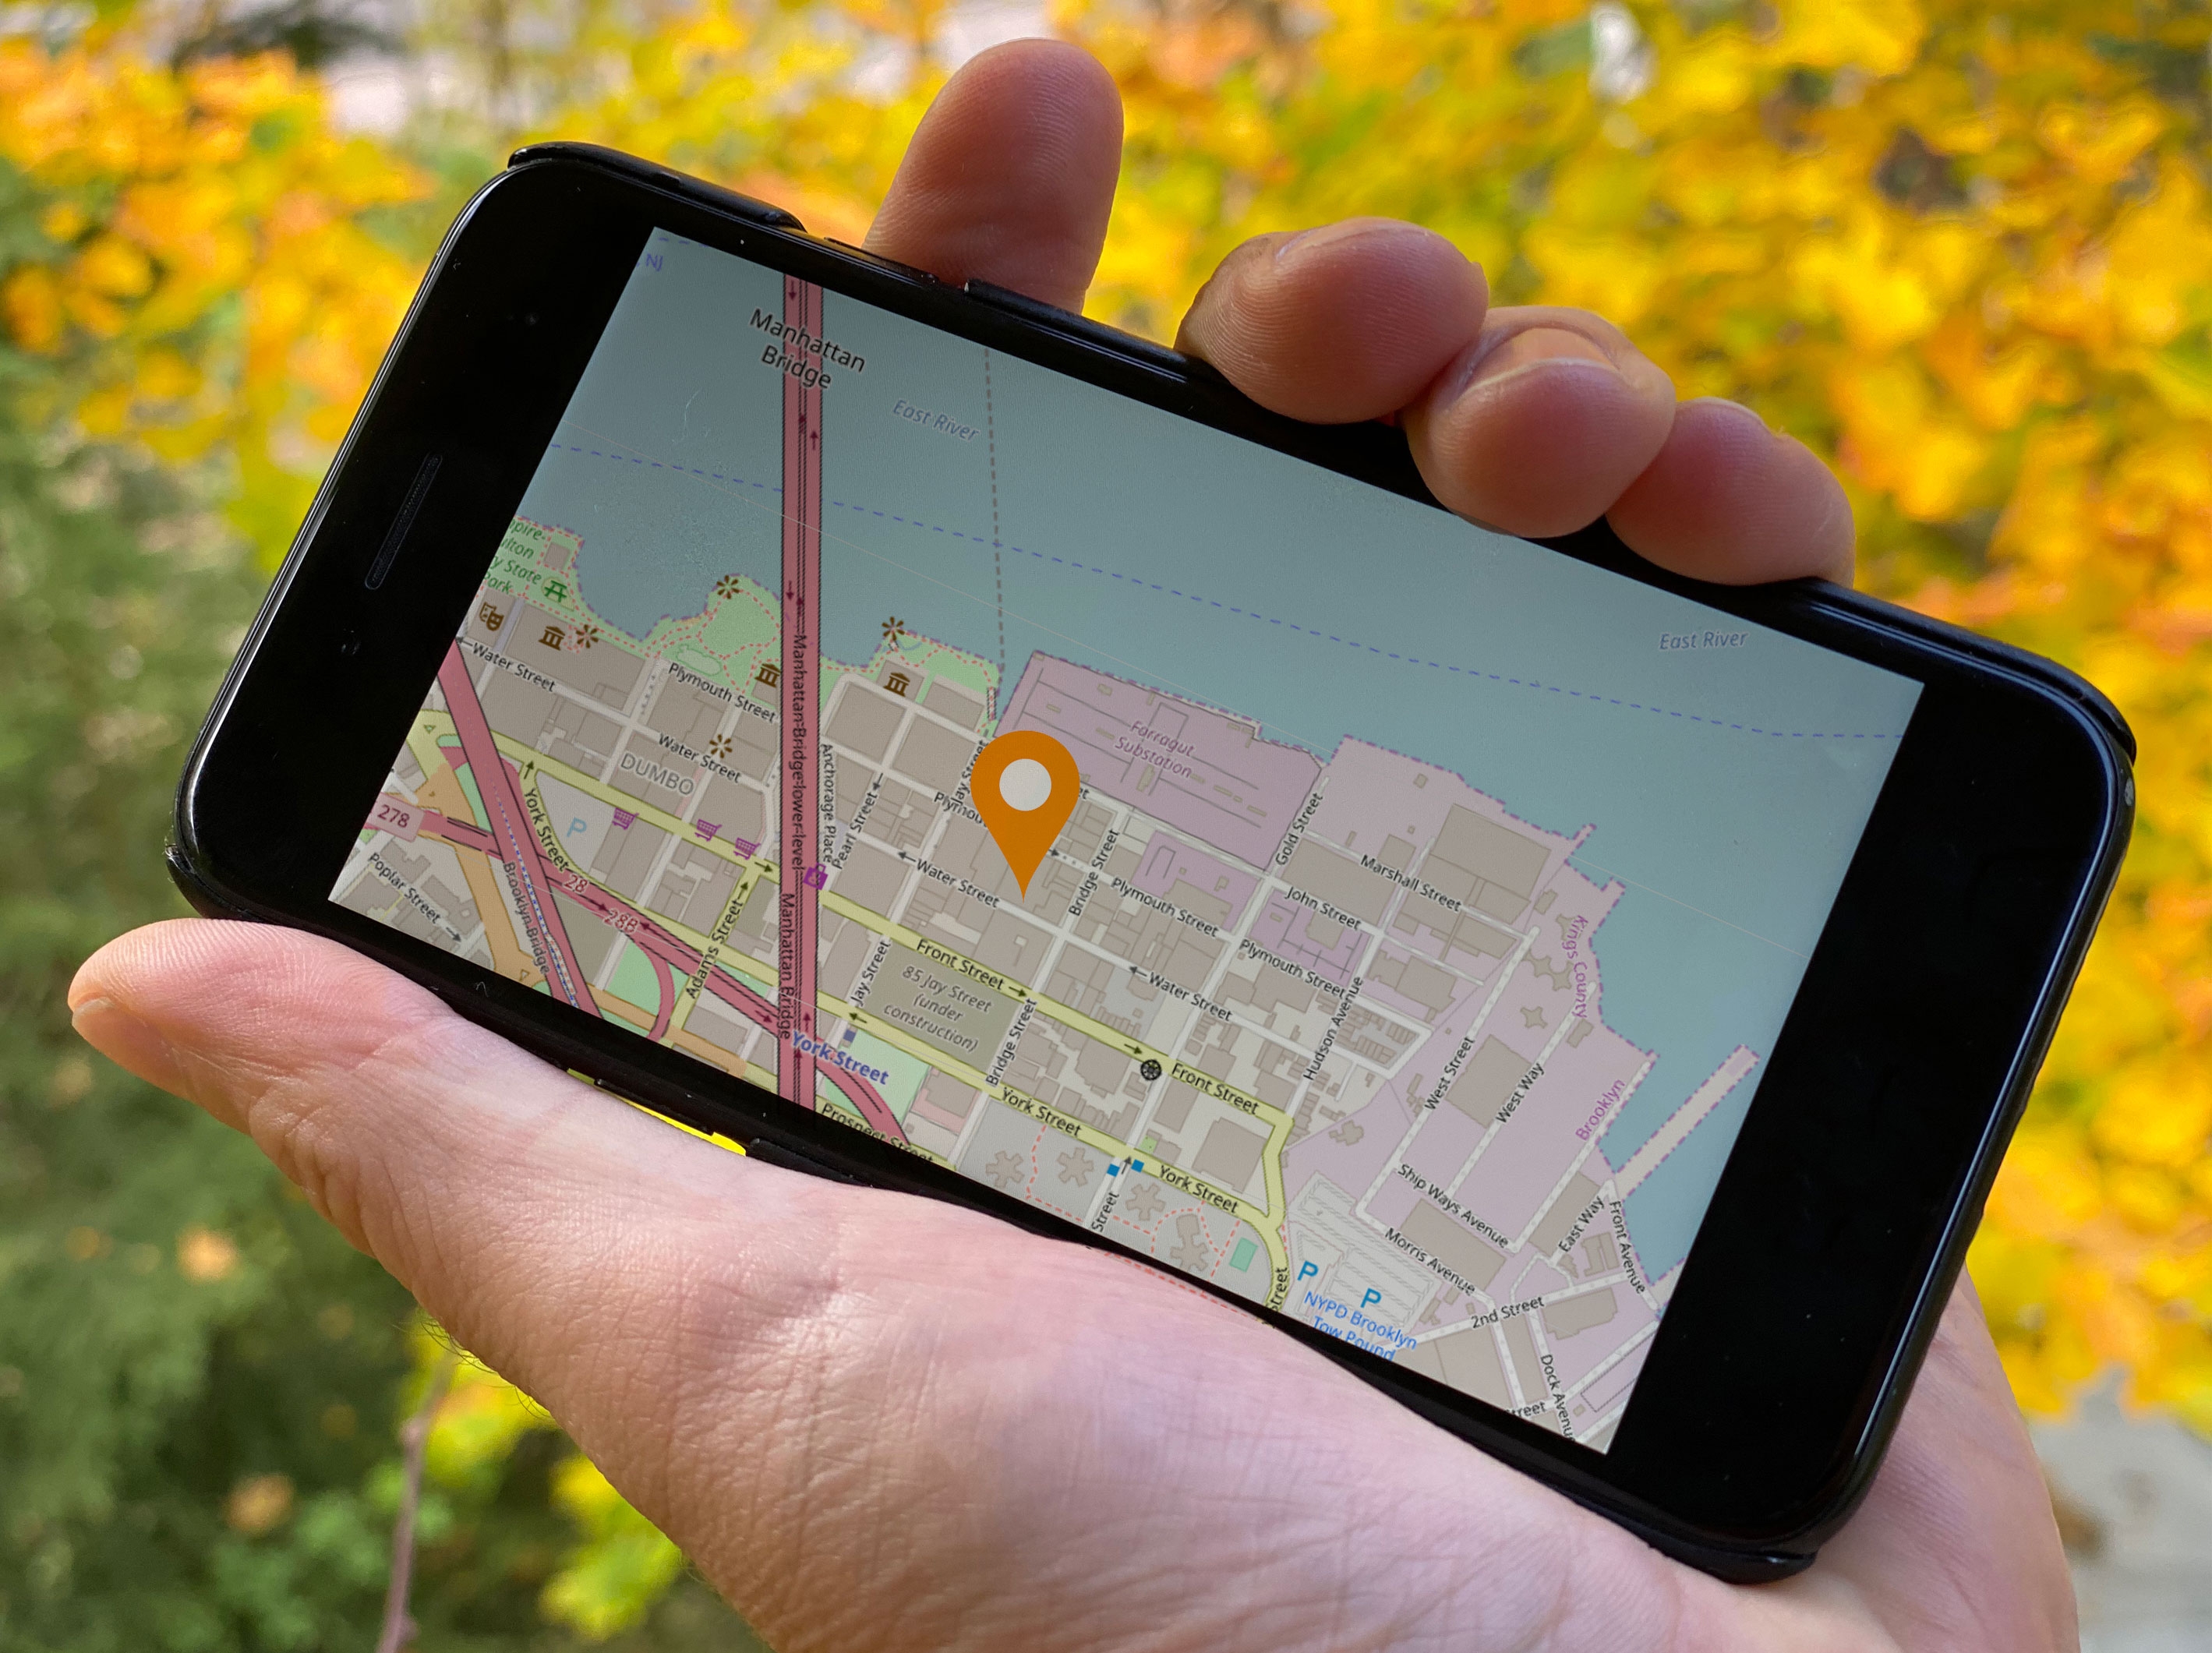 New forms in TOTAL for Mobile, faster geocoding, Google Maps, and